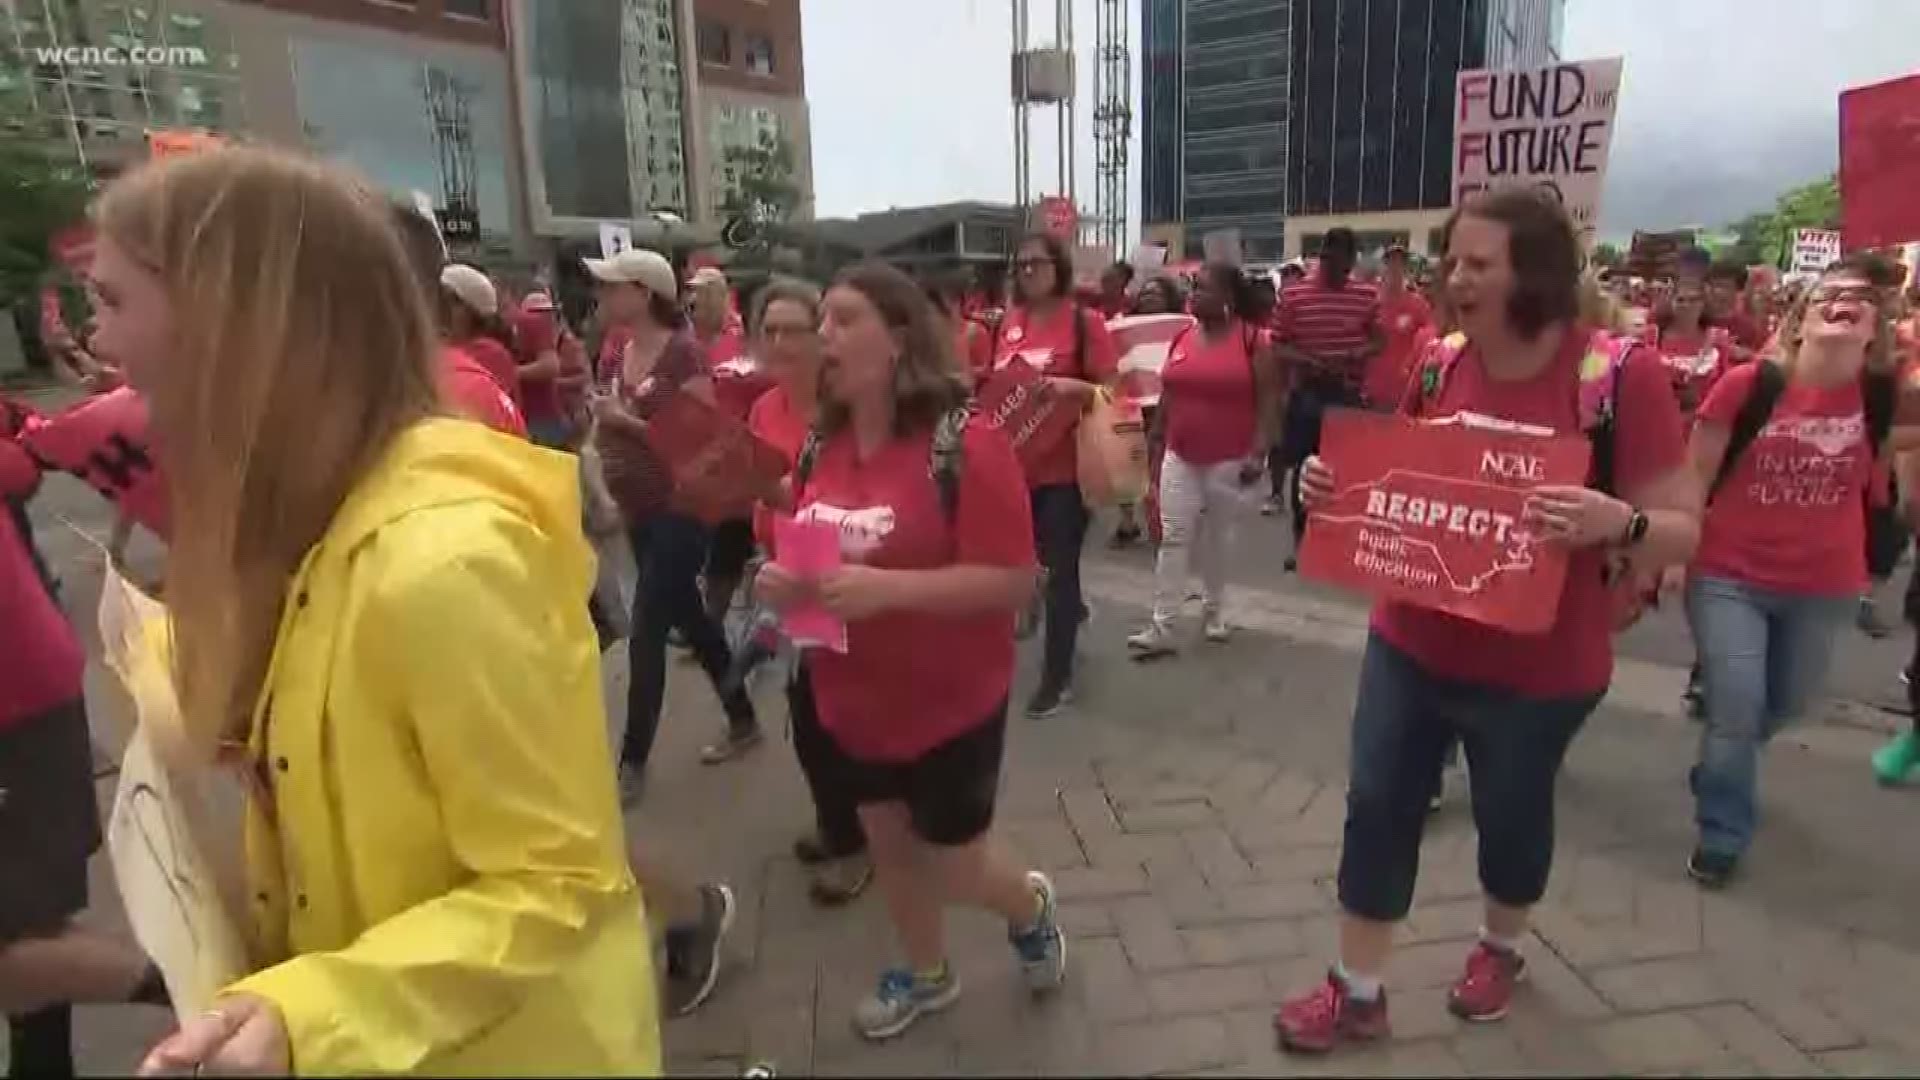 Downtown Raleigh turned into a sea of red as teachers from across the state unite to bring the same message to lawmakers at the state capitol.